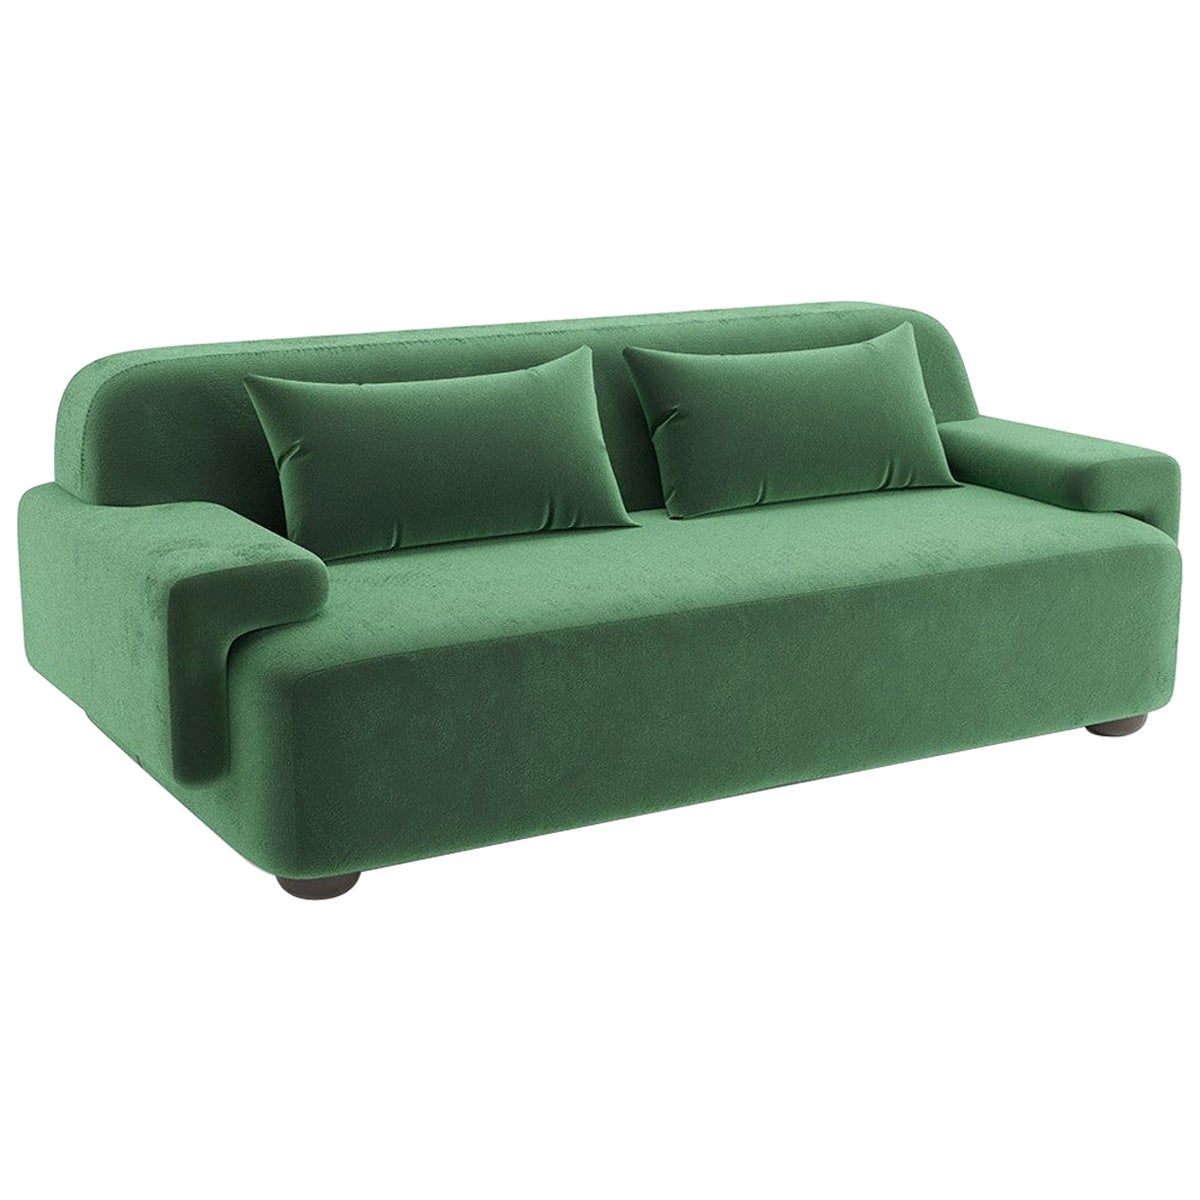 Popus Editions Lena 4 Seater Sofa in Green '771727' Como Velvet Upholstery For Sale